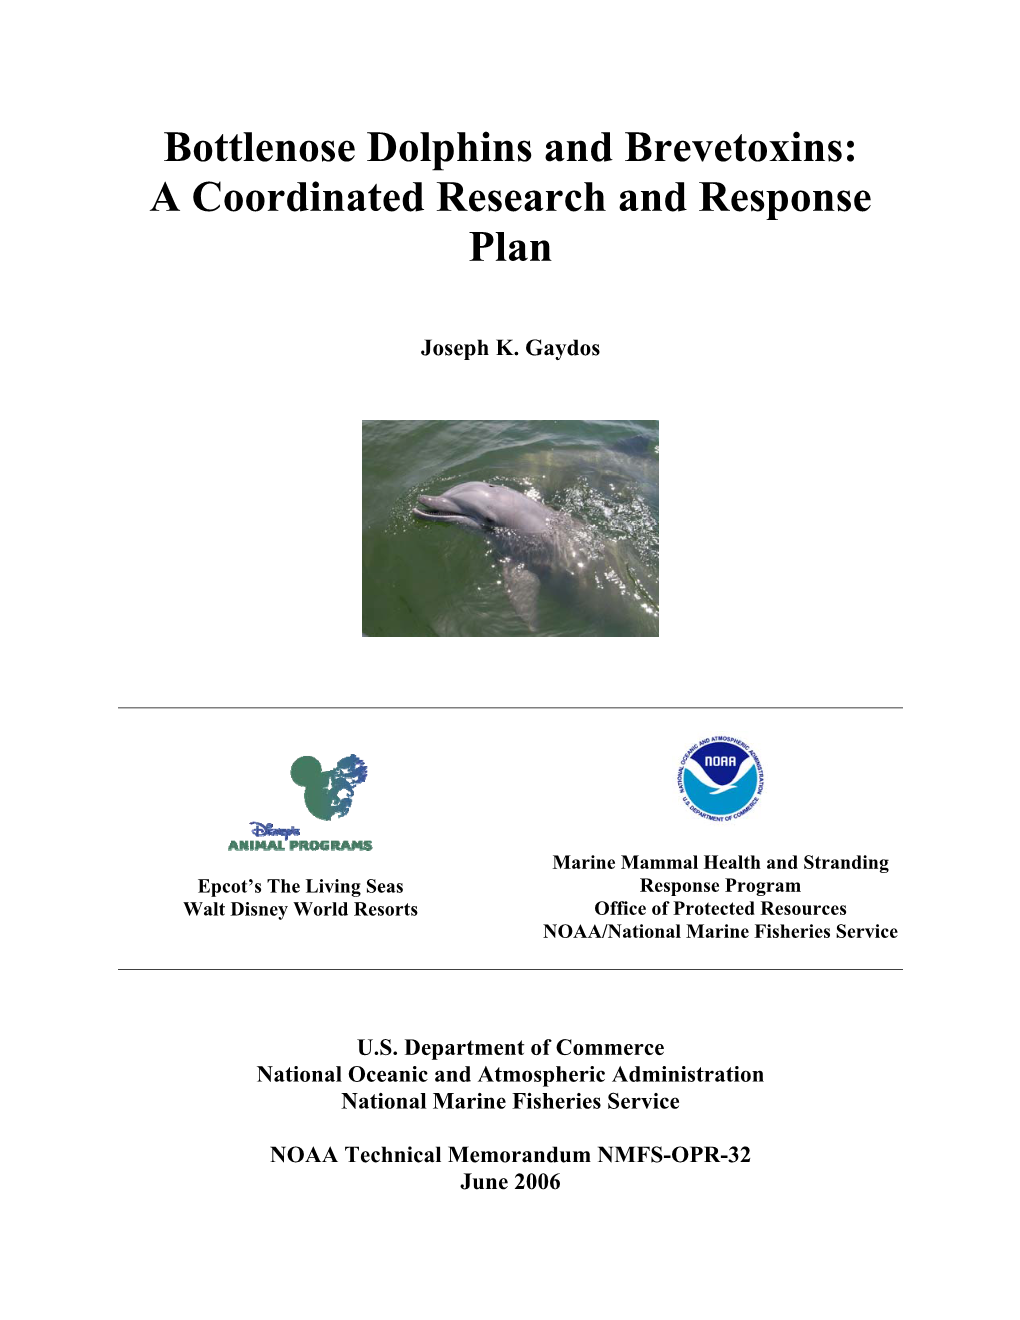 Bottlenose Dolphins and Brevetoxins: a Coordinated Research and Response Plan